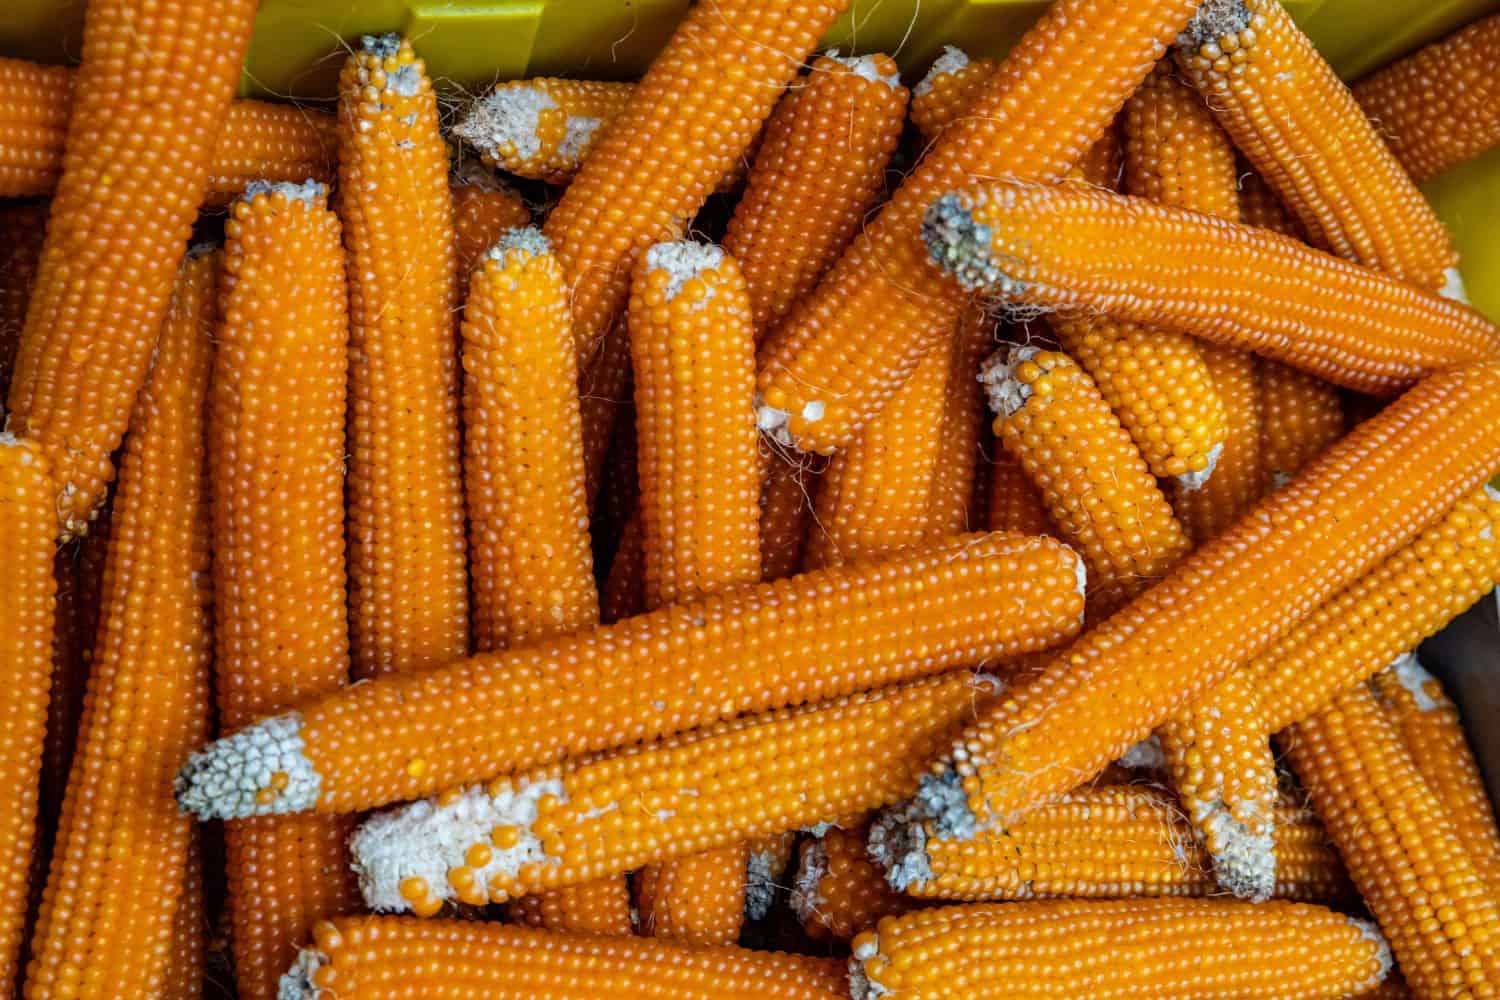 Flint corn orange color for sale at an open air farmers market stall, full background, closeup top view